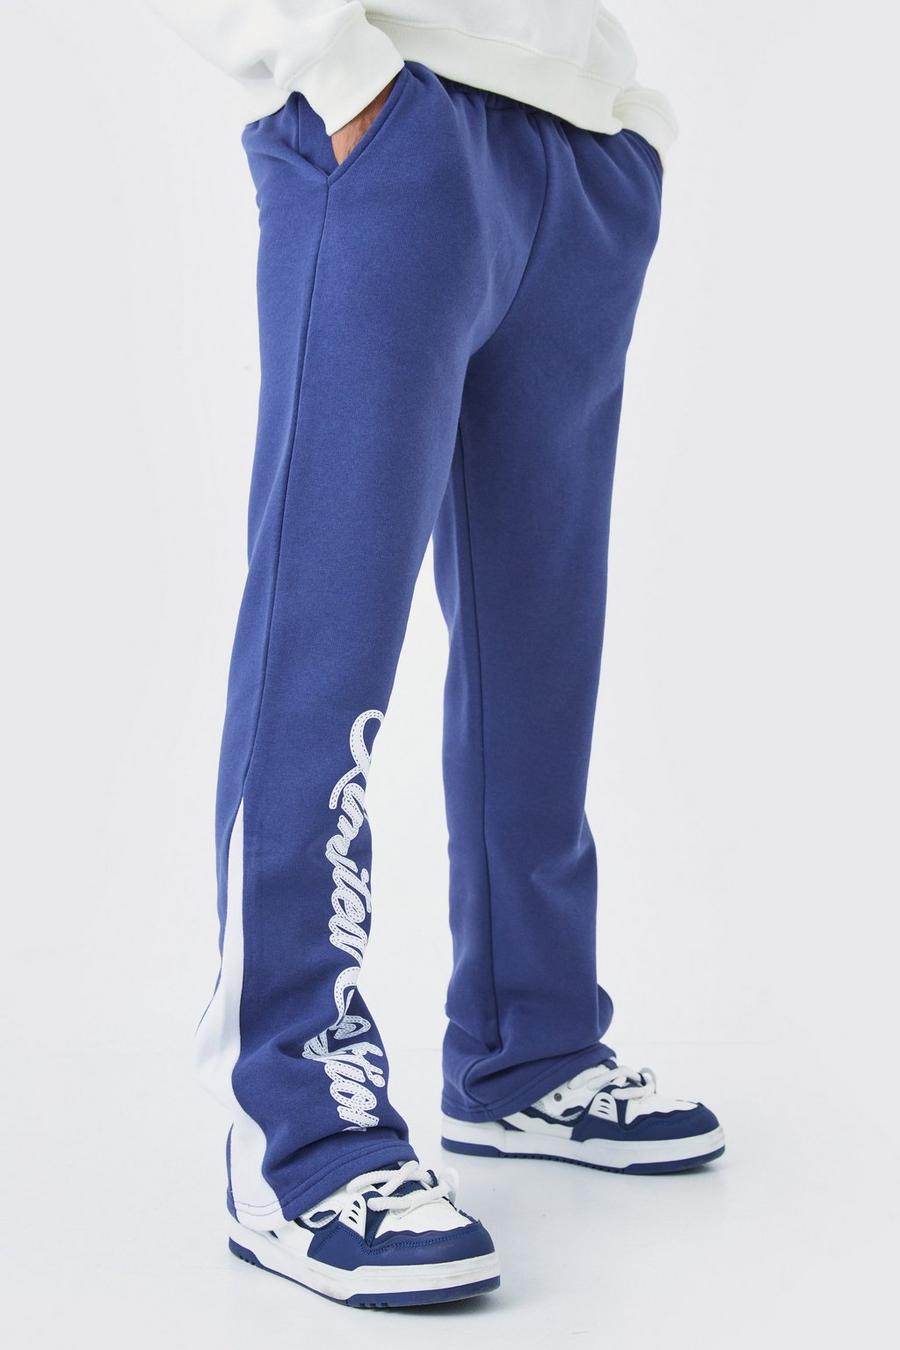 Pantalón deportivo Limited Edition con refuerzos, Slate blue image number 1